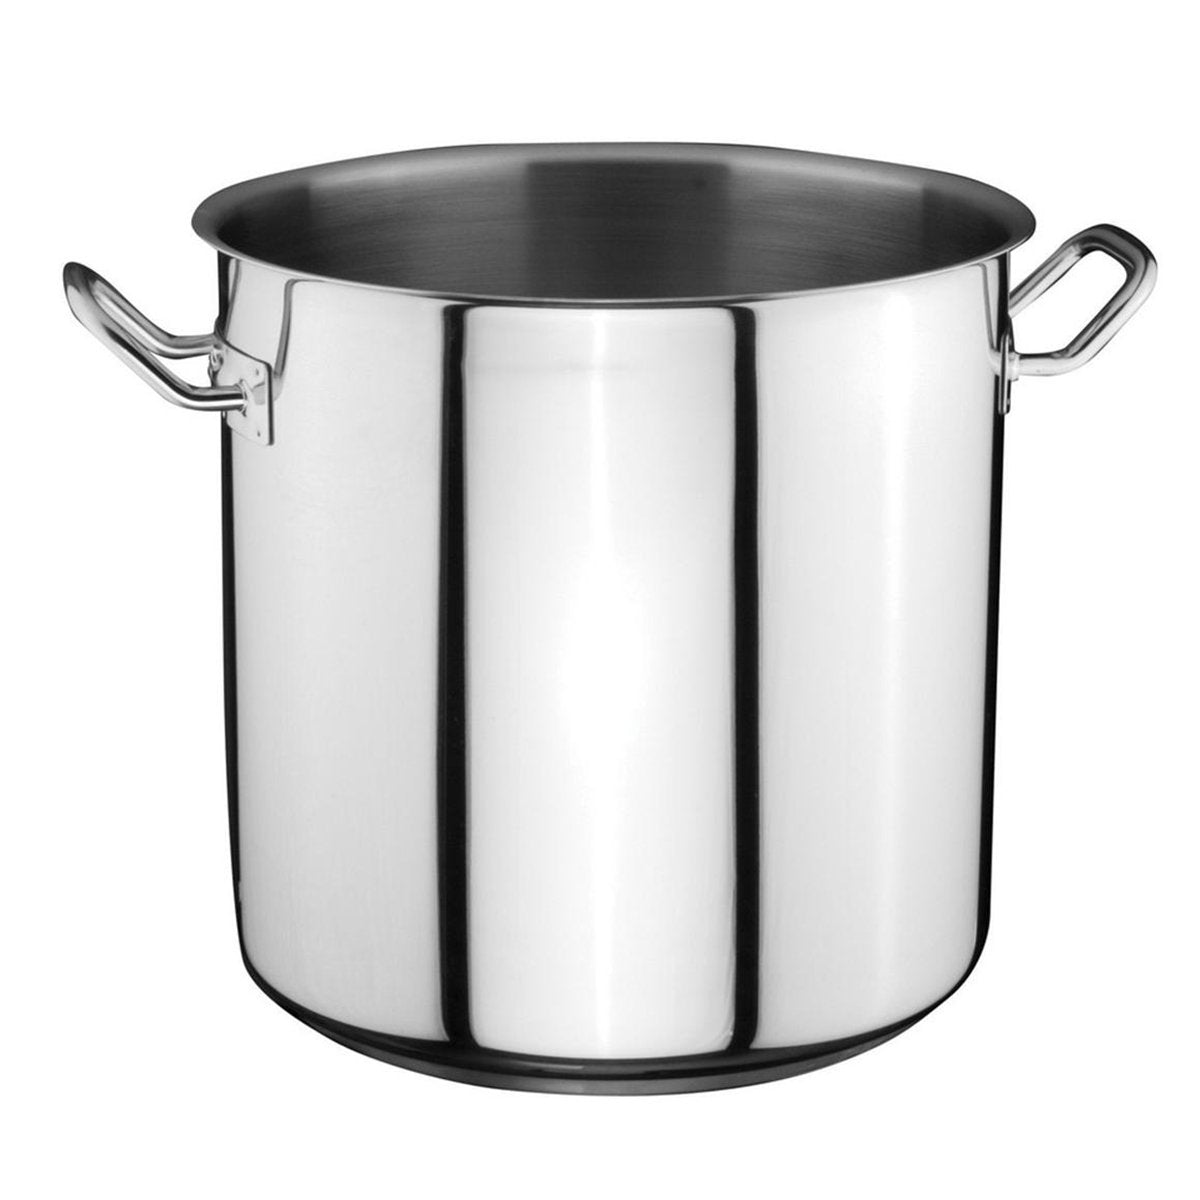 (0145.04011.01) "PAN - STAINLESS STEEL HANDLE, W/O LID, Size:40x11cm" - Mabrook Hotel Supplies